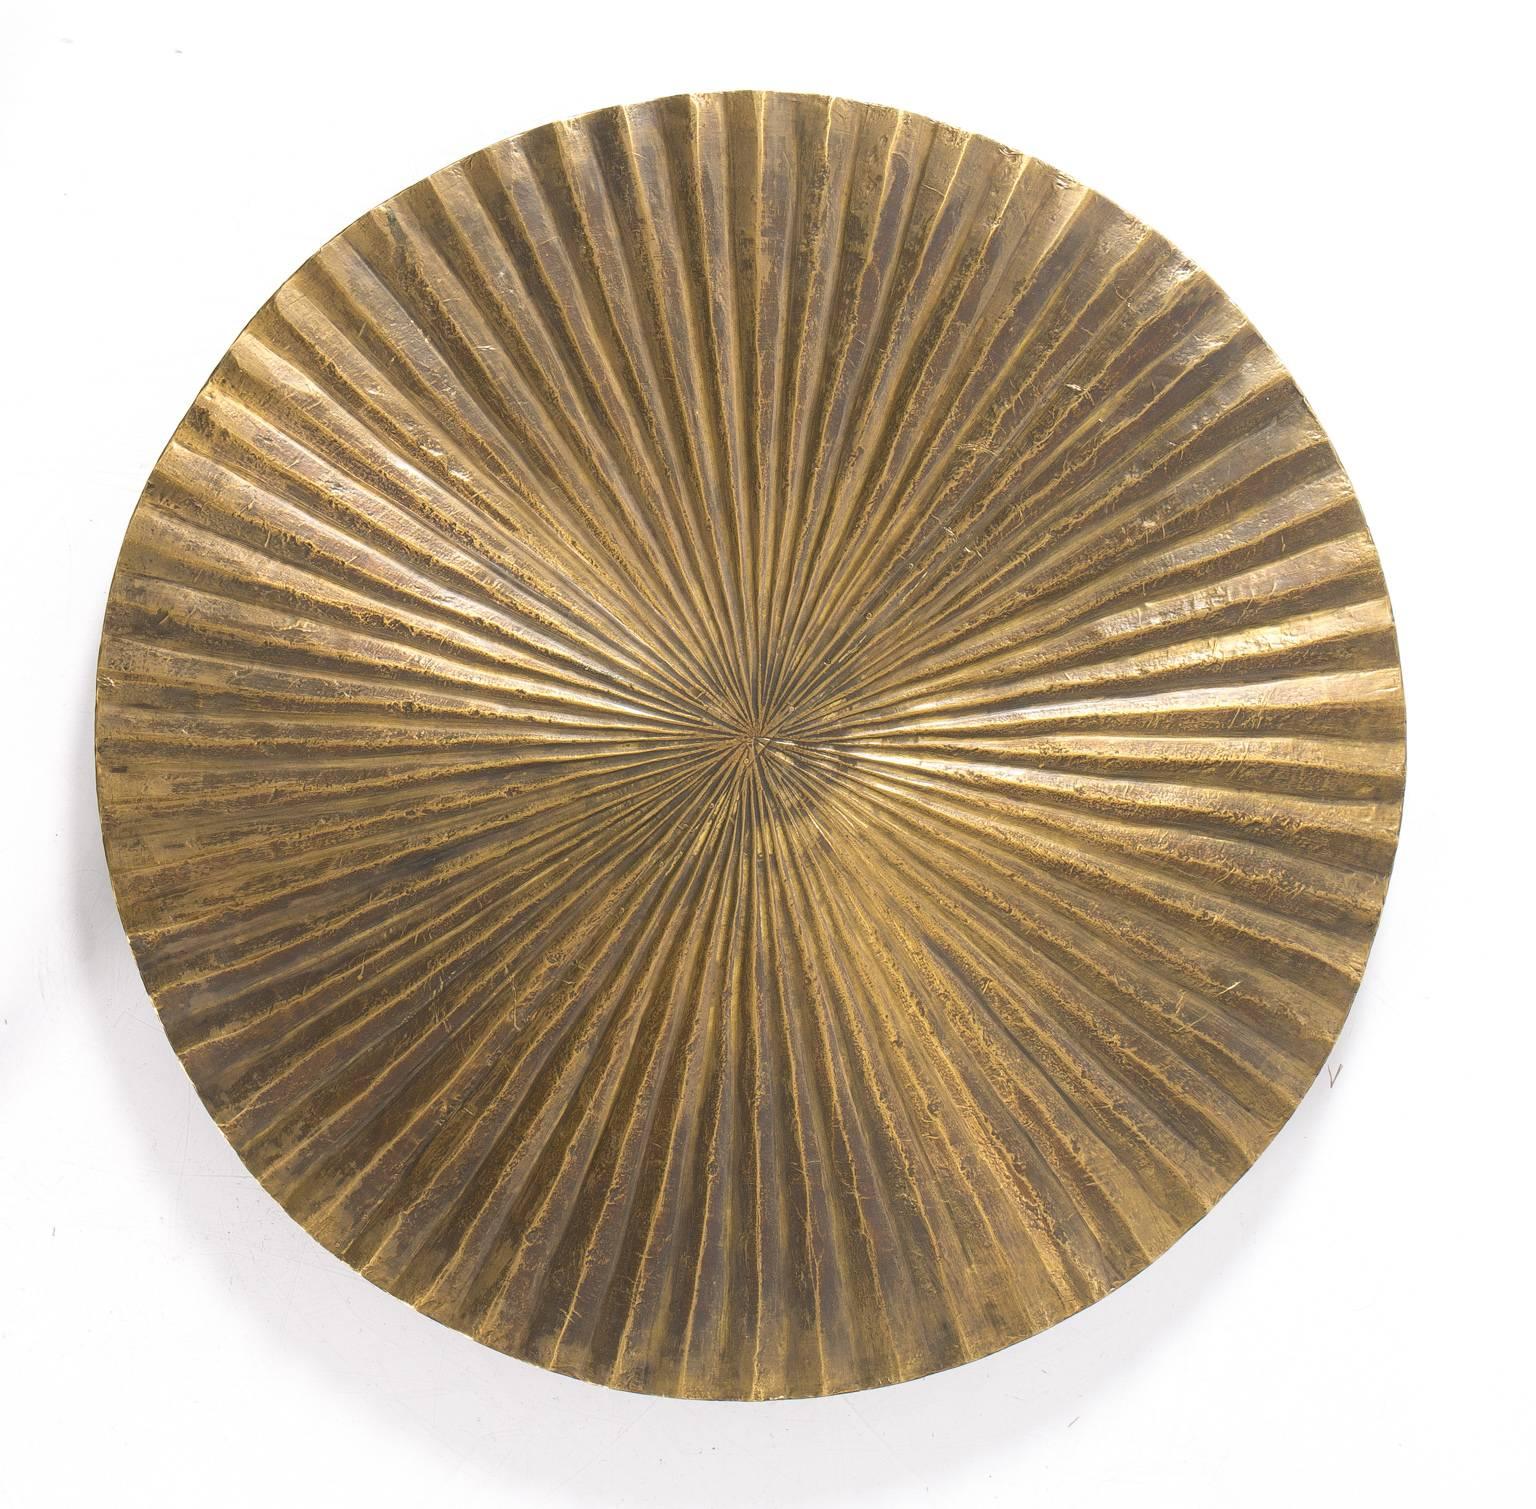 Three part wall hanging comprised of separate round overlapping ridged circles of various sizes.
   